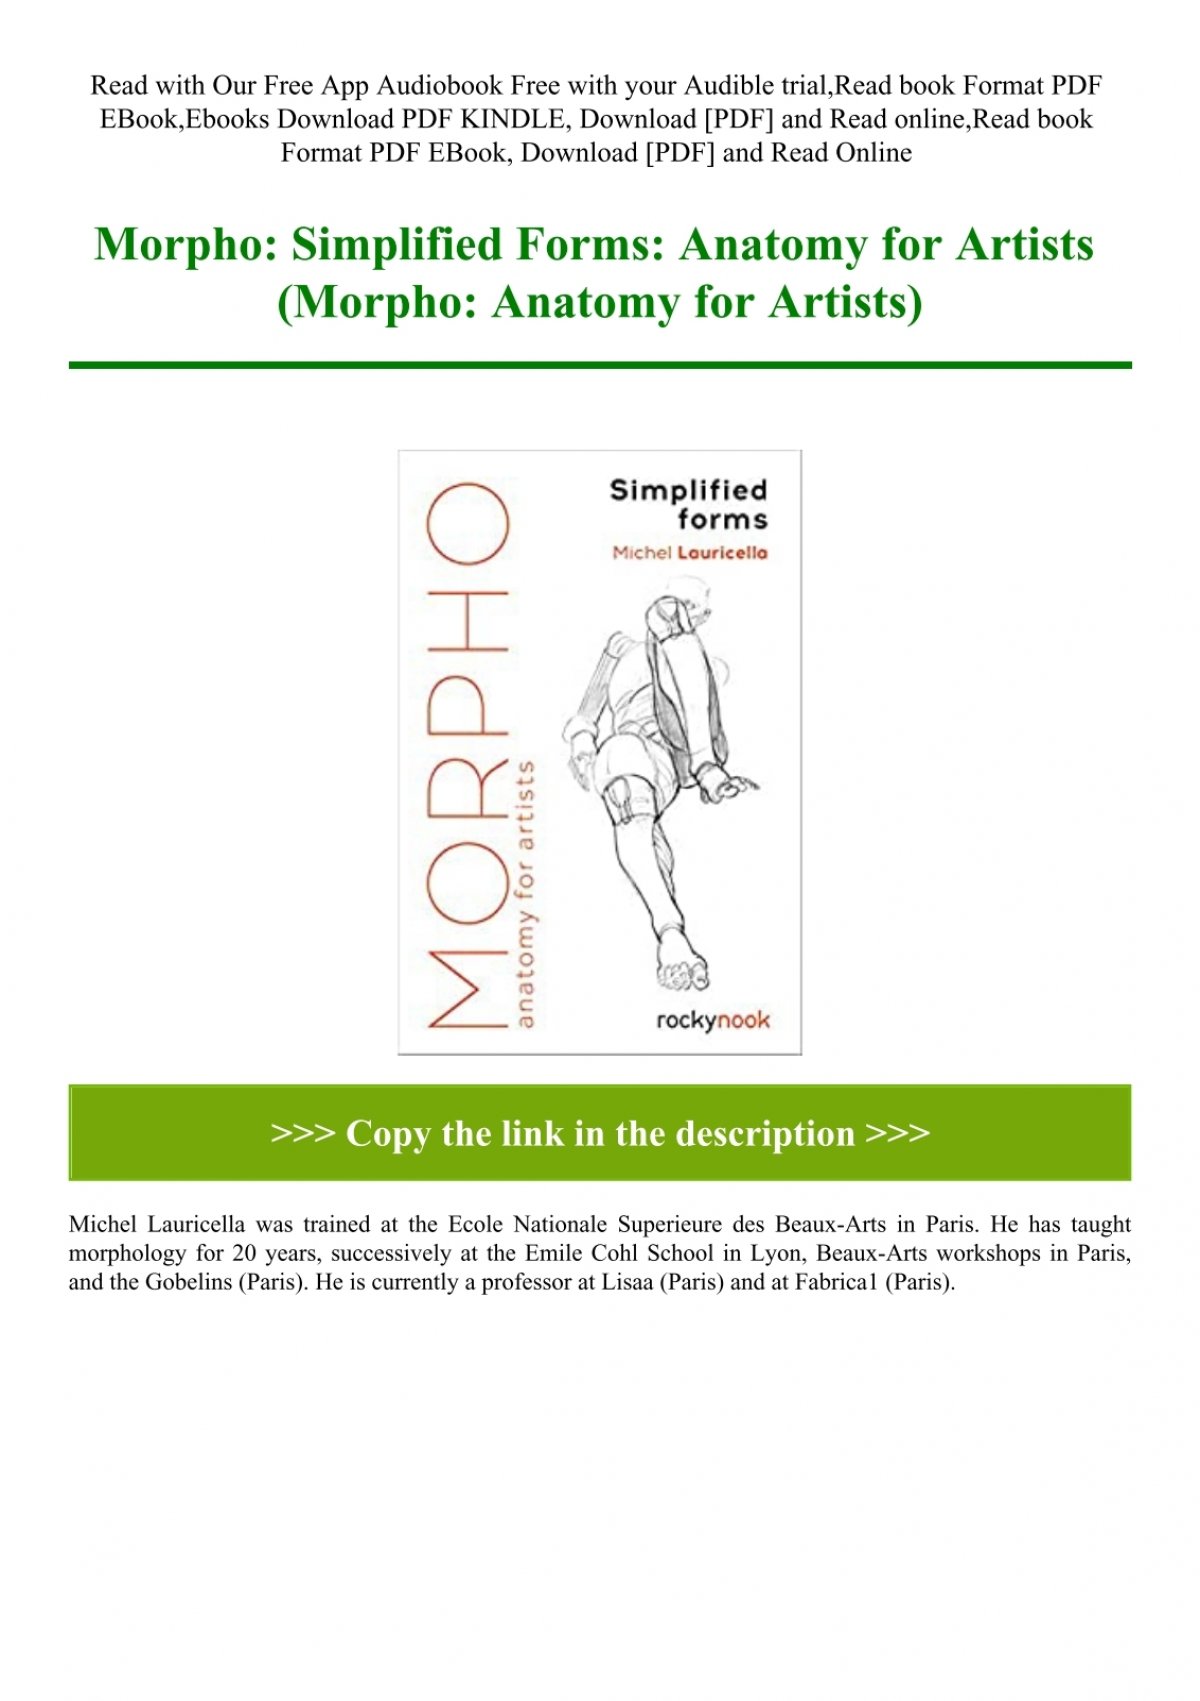 pdf-morpho-simplified-forms-anatomy-for-artists-morpho-anatomy-for